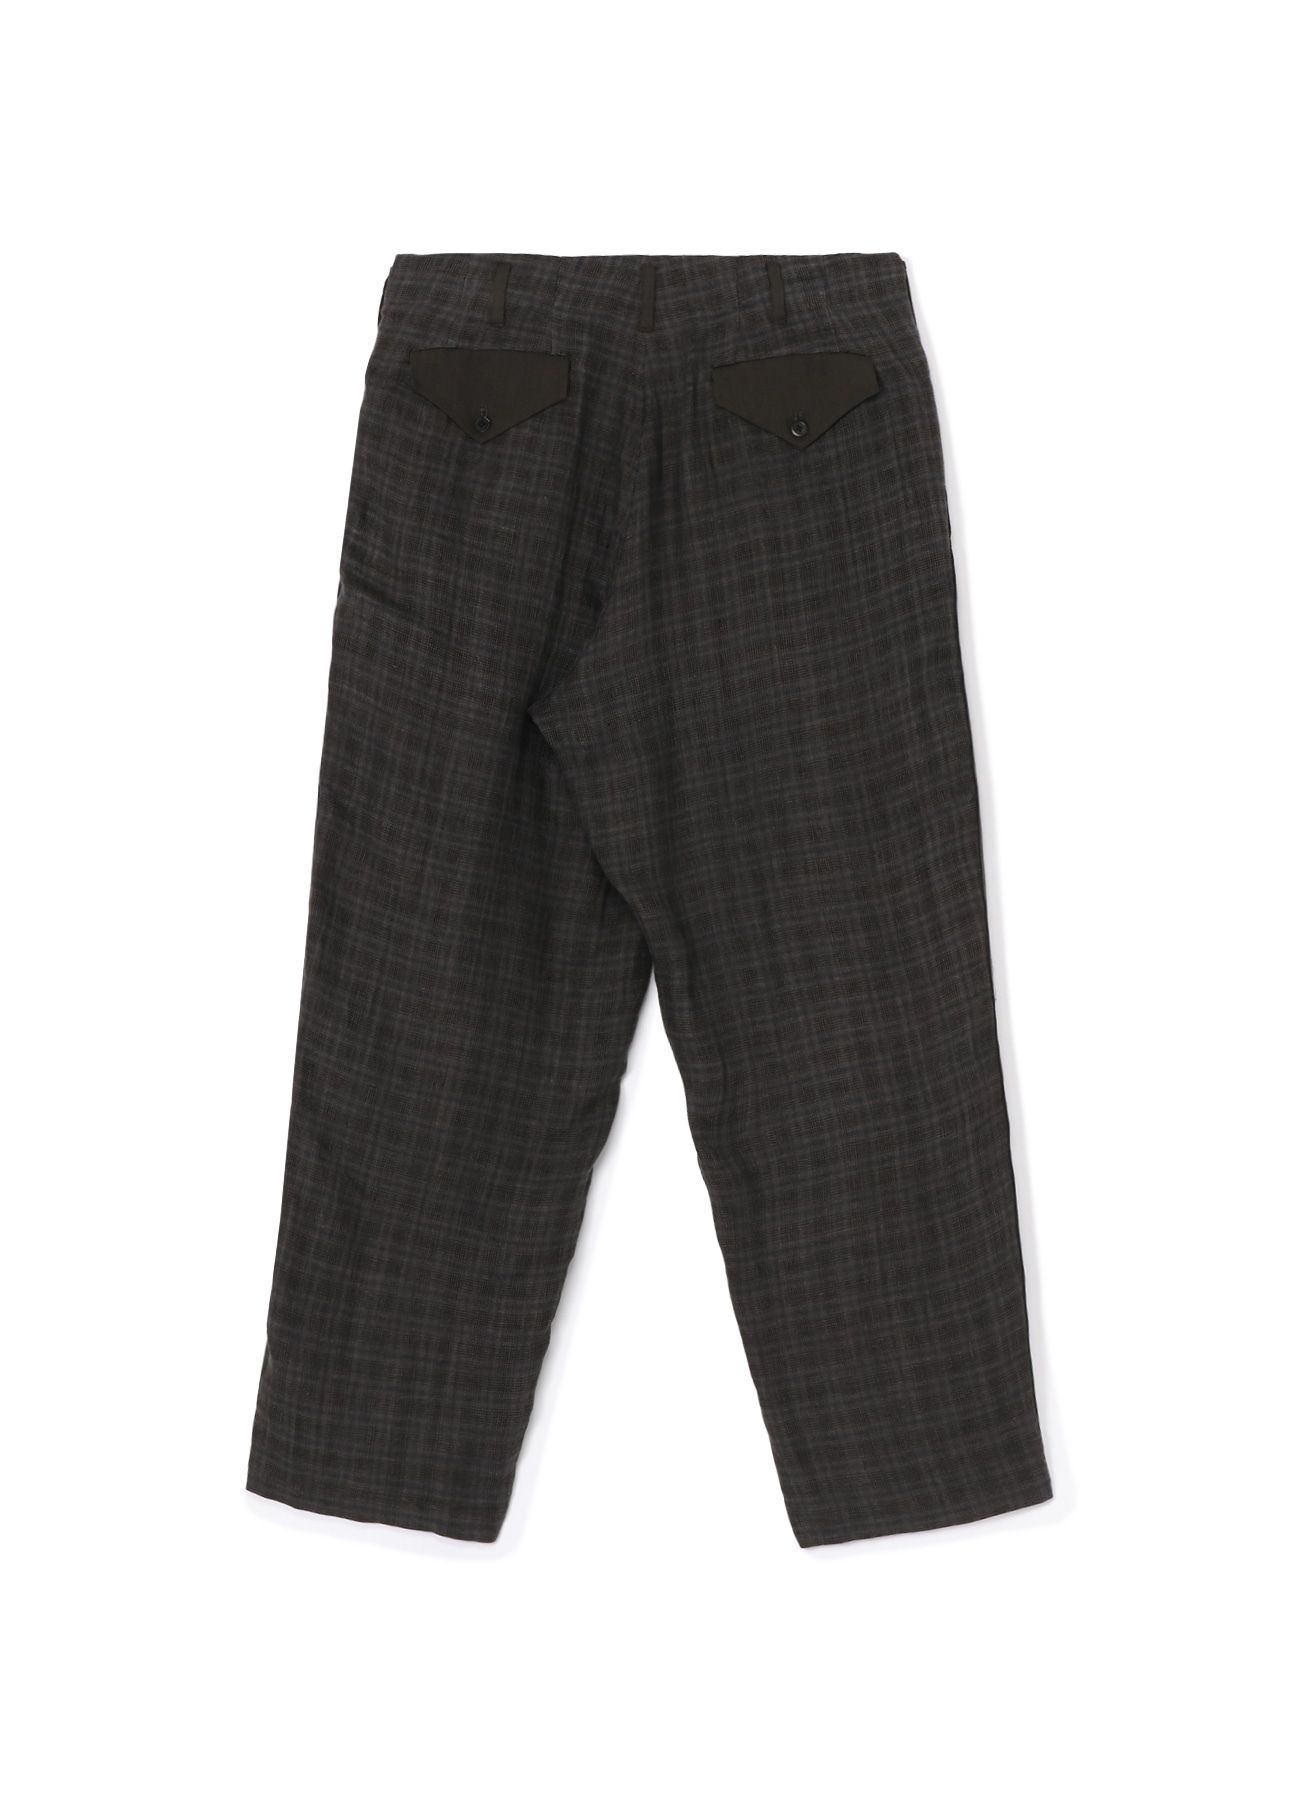 LINEN TWILL PLAID PANTS WITH SIDE TAPE(S Black): Y's for men ...